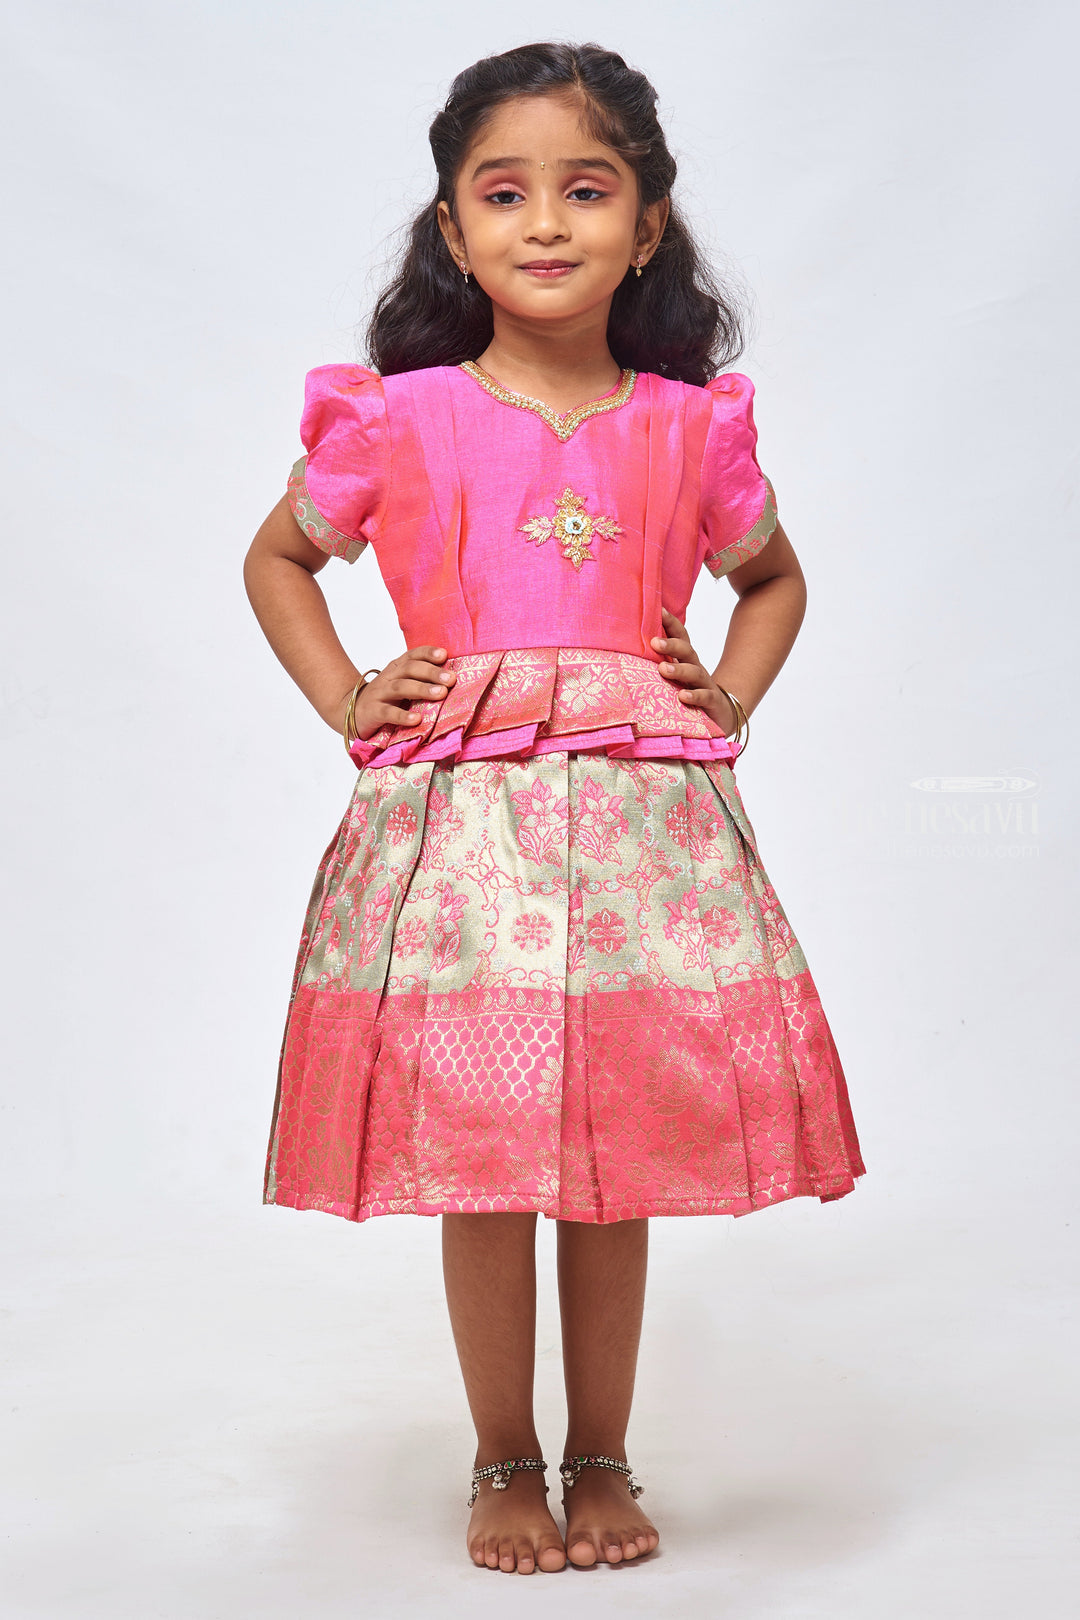 The Nesavu Silk Party Frock Pink Blossom Elegance: Box-Pleated Silk Dress Delight Adorned with Zari Floral Embroidery Nesavu 16 (1Y) / Pink / Silk Blend SF711-16 Zari Embroidered Silk Designer Frocks for Girls | Premium Silk Frock Collections | The Nesavu